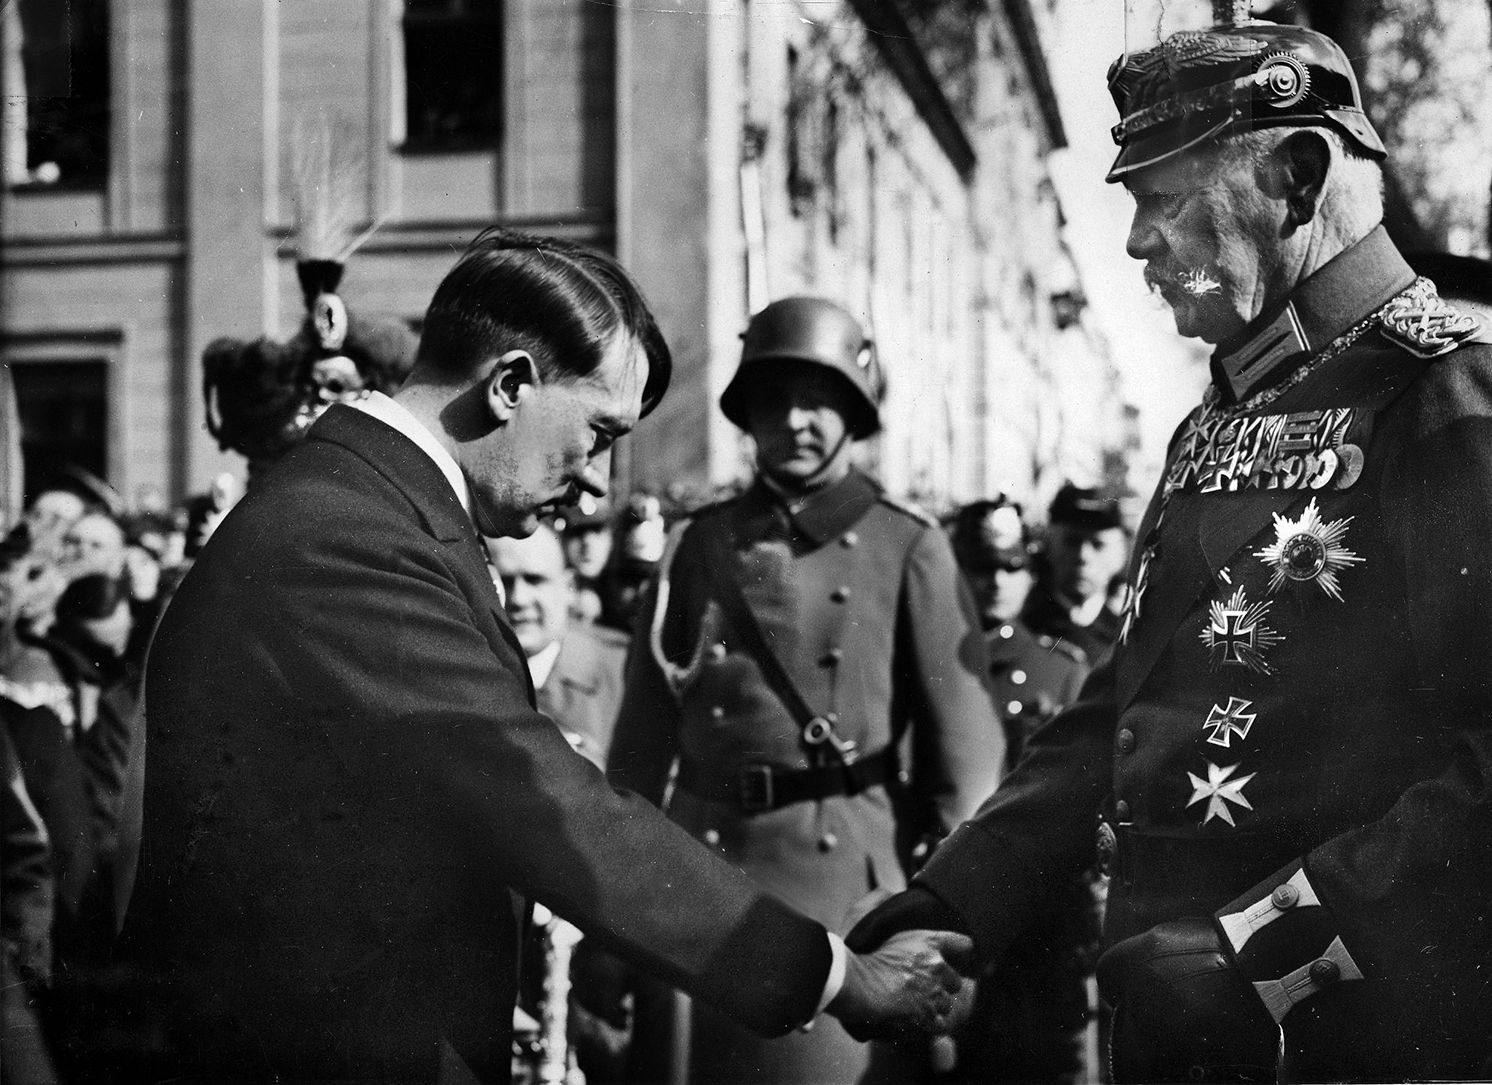 Adolf Hitler, the proverbial wolf in sheep’s clothing, bows subserviently before German President Paul von Hindenburg. Thinking that Hitler could be controlled, a group of German politicians persuaded Hindenburg to appoint the Nazi leader Chancellor of Germany in 1933. Albert Einstein soon fled the country.